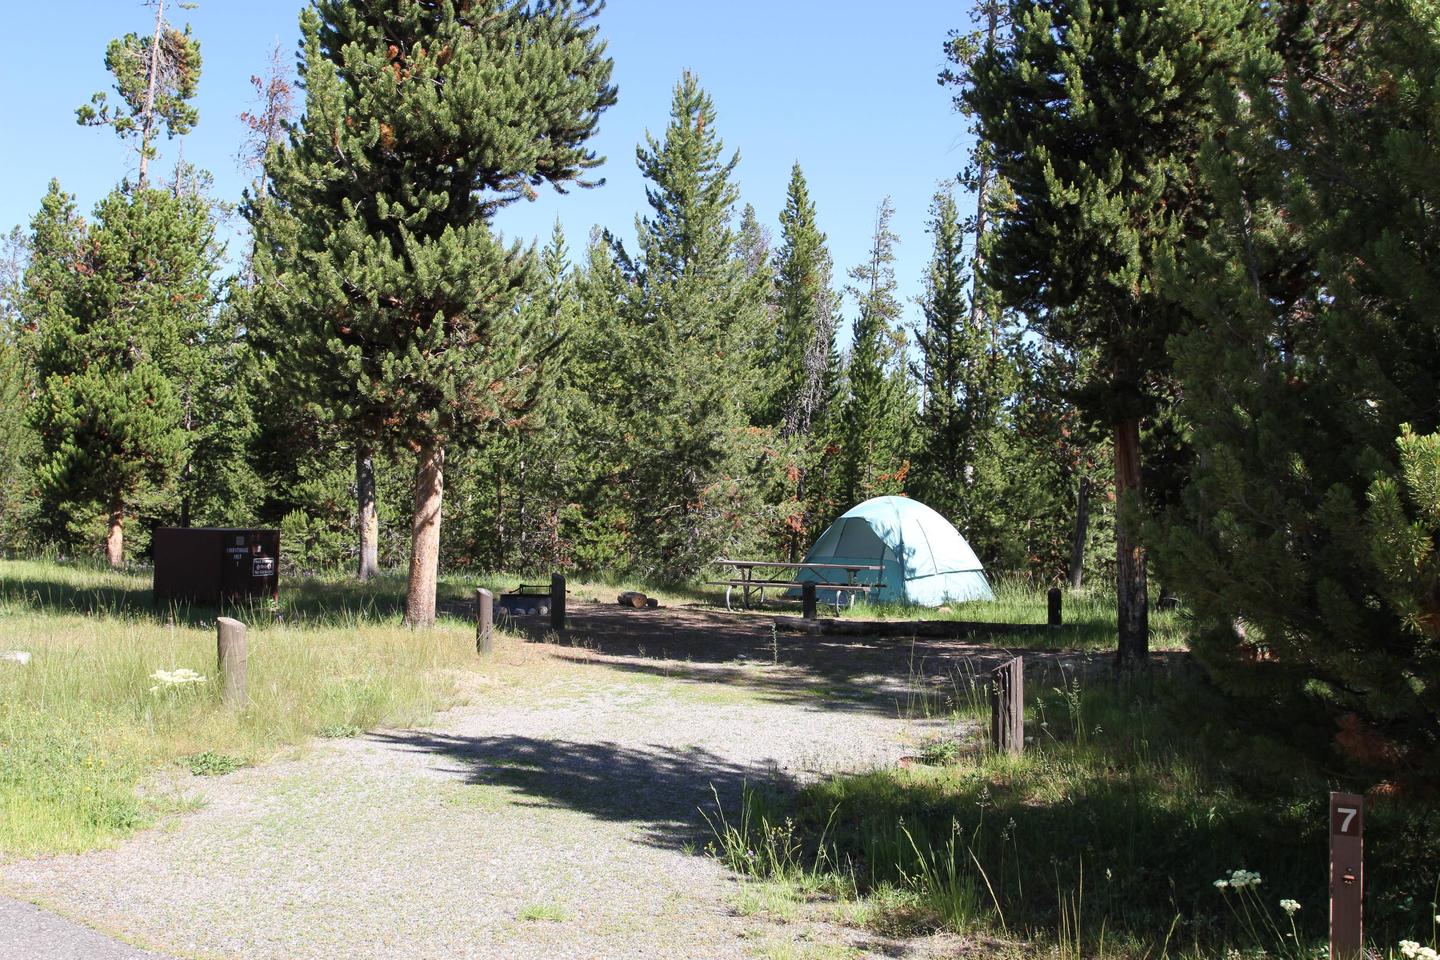 Indian Creek Campground site #7